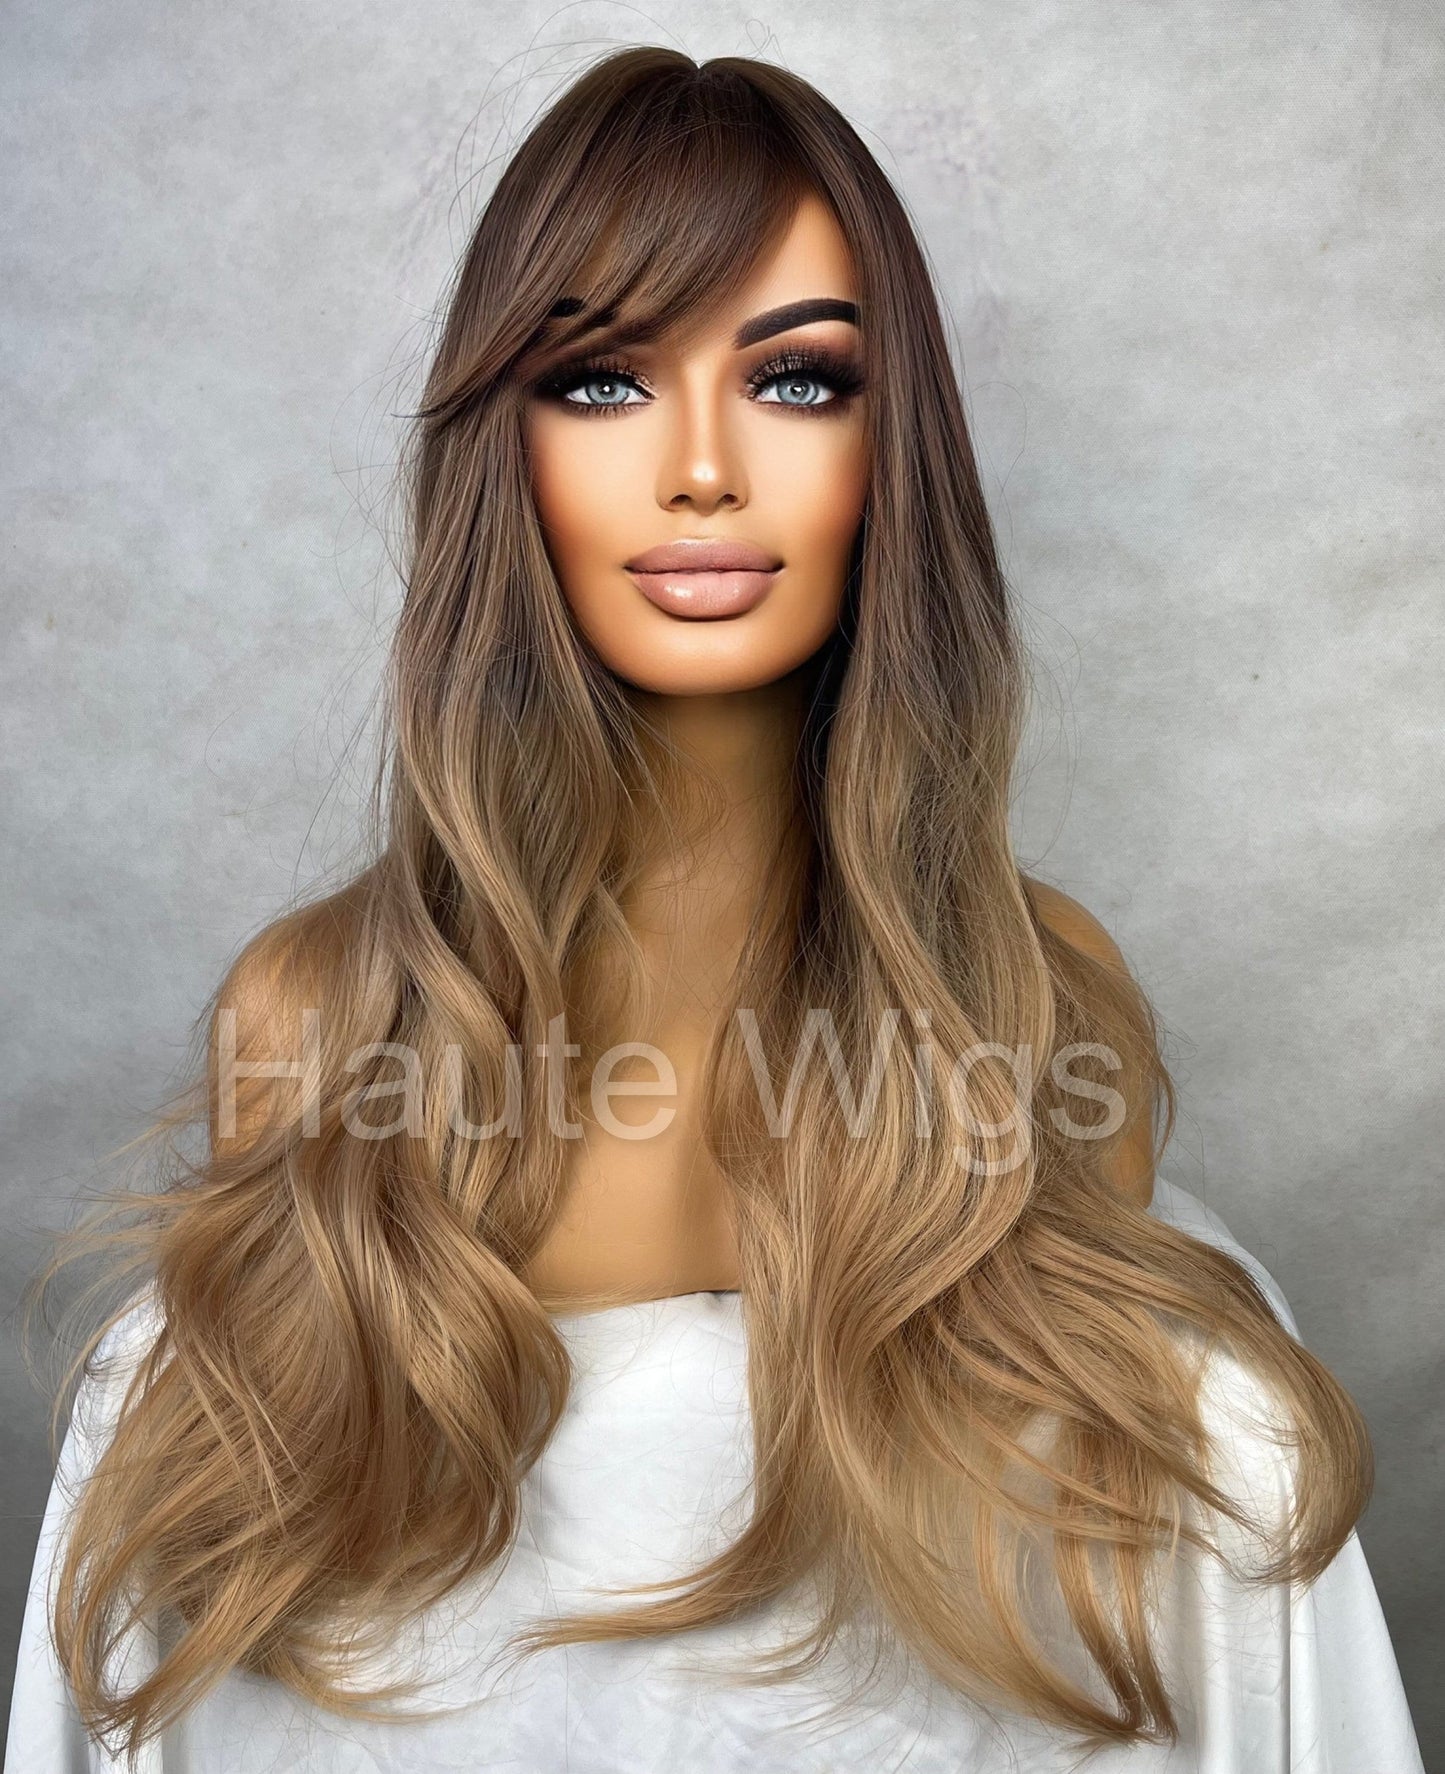 Blonde Brown Ombre 26 Inch Women Long Wig Synthetic Hair Fringe Bangs Straight Wavy Heat Resistant Highlights Balayage